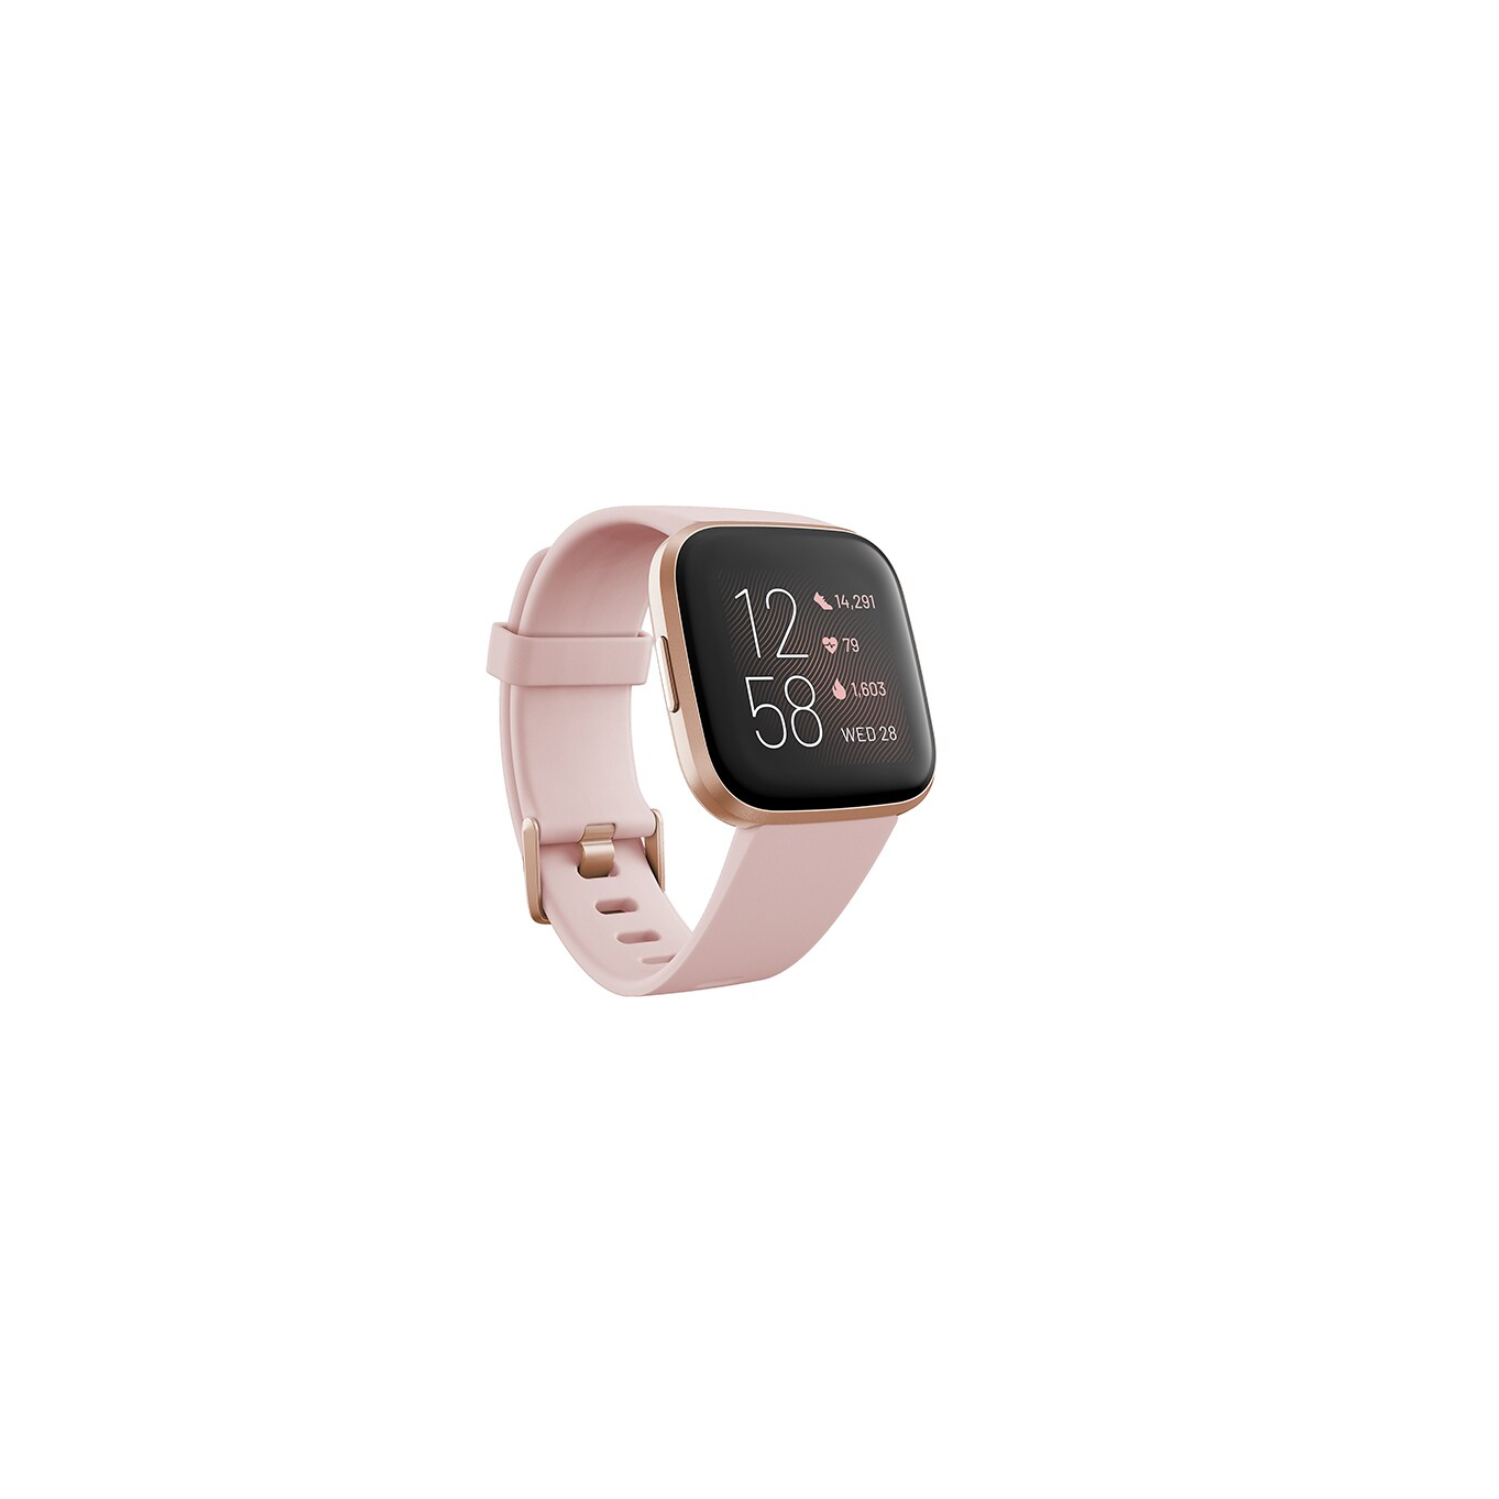 Openbox- Fitbit Versa 2 Health and Fitness Smartwatch (Petal/Copper Rose)